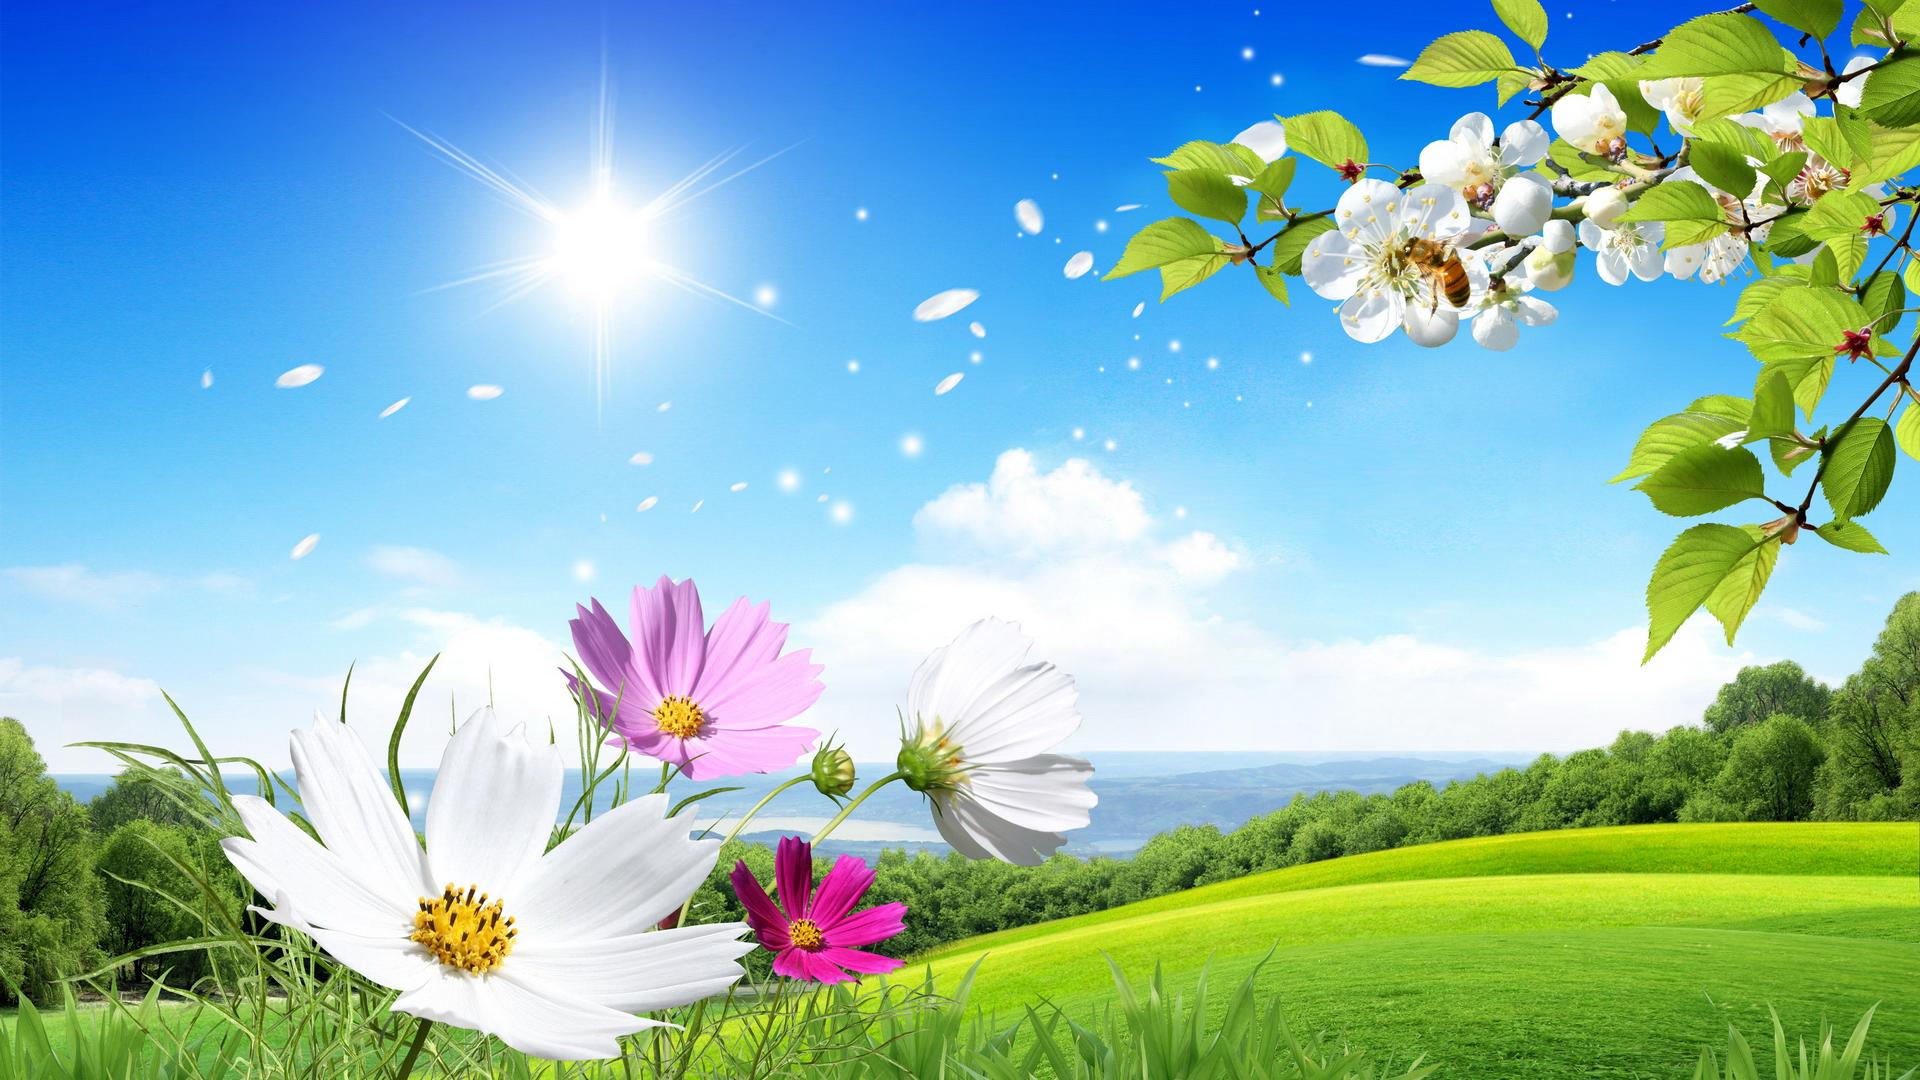 Beautiful Summer And Flowers Scenery Wallpaper Widescreen High